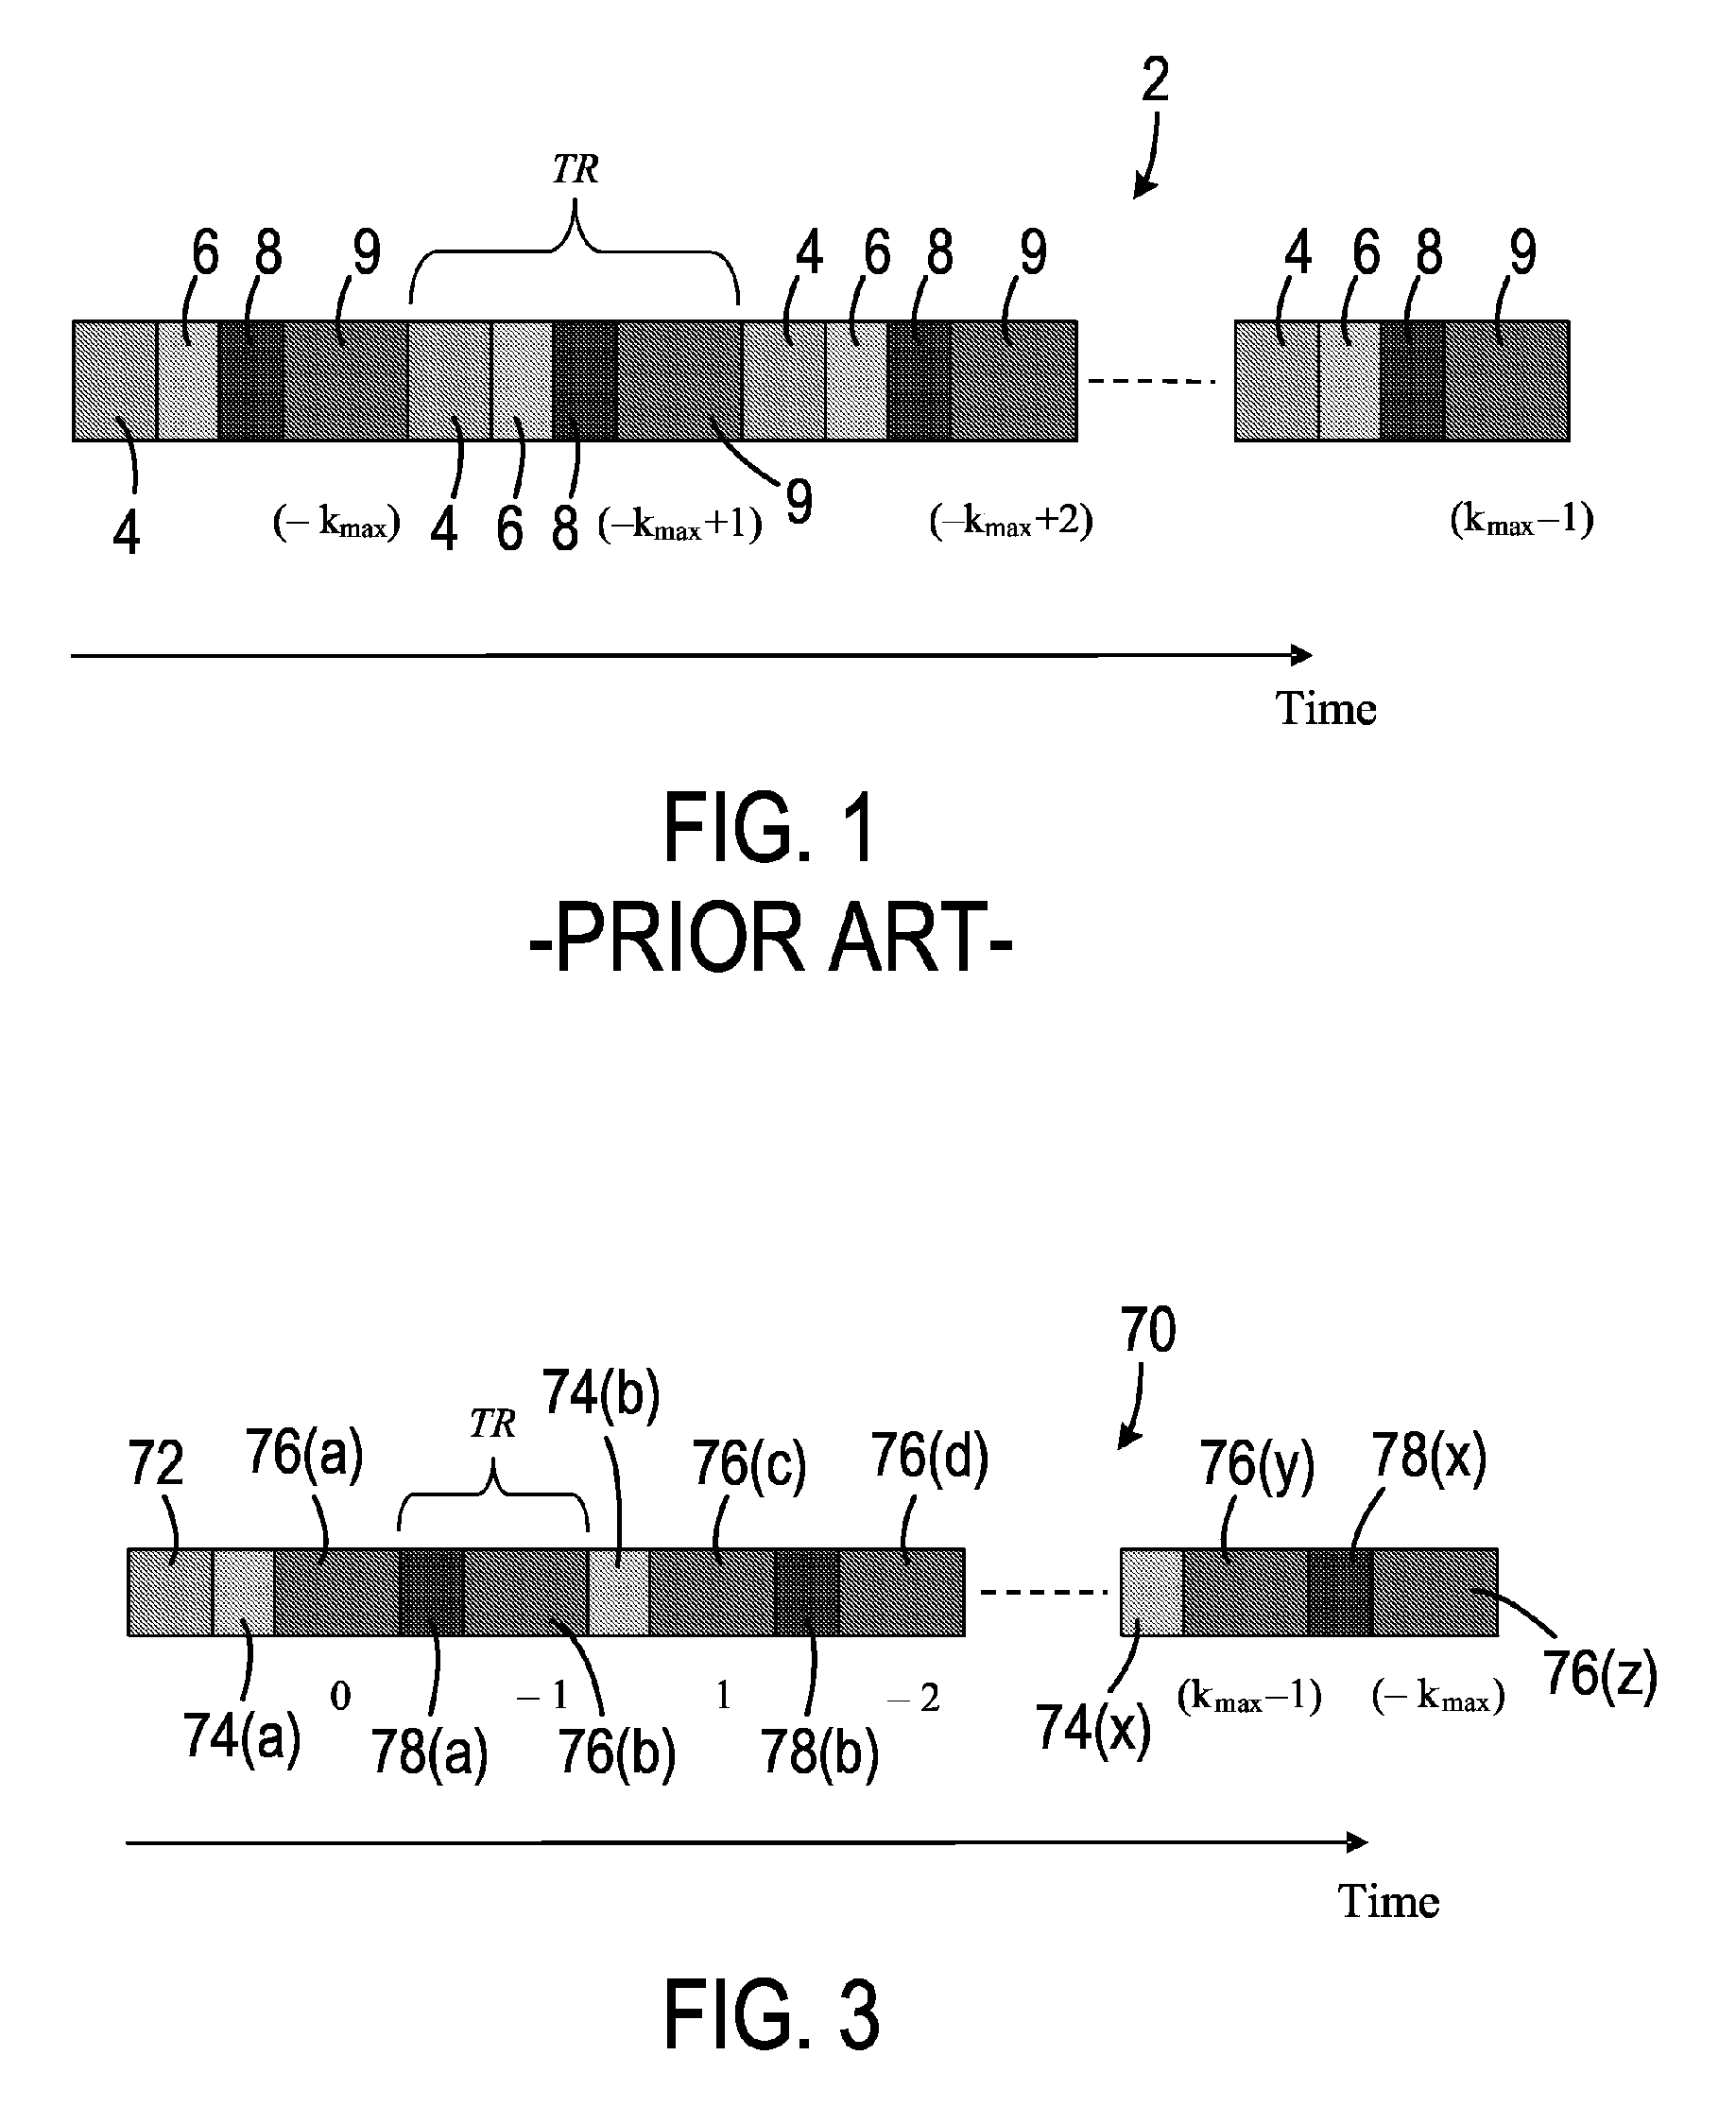 Apparatus and method of simultaneous fat suppression, magnetization transfer contrast, and spatial saturation for 3D time-of-flight imaging